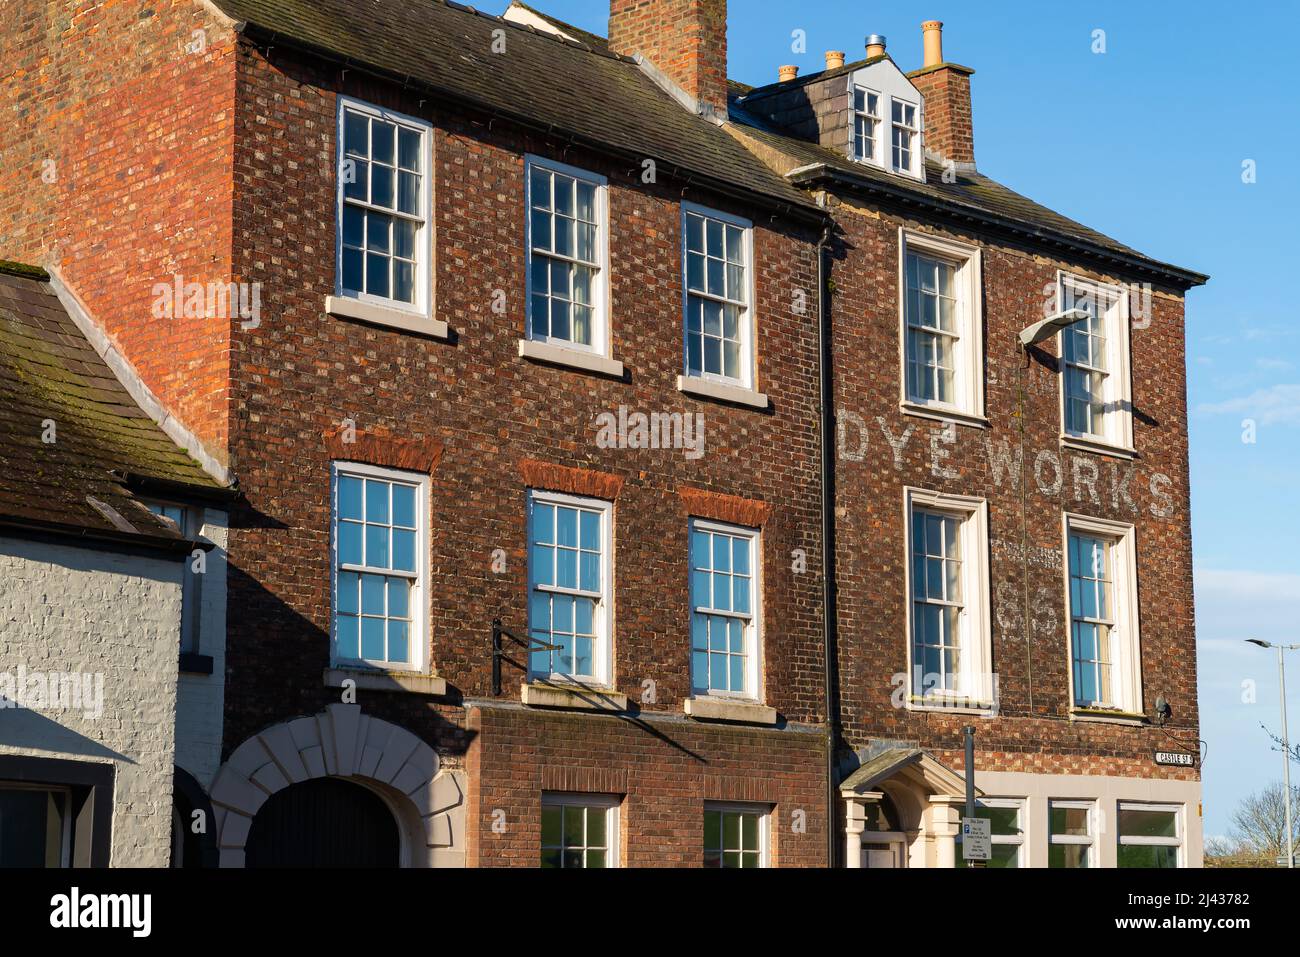 Carlisle, England - United Kingdom - March 17th, 2022: Old Dye Works building on Castle Street in Carlisle Towne Center. Stock Photo